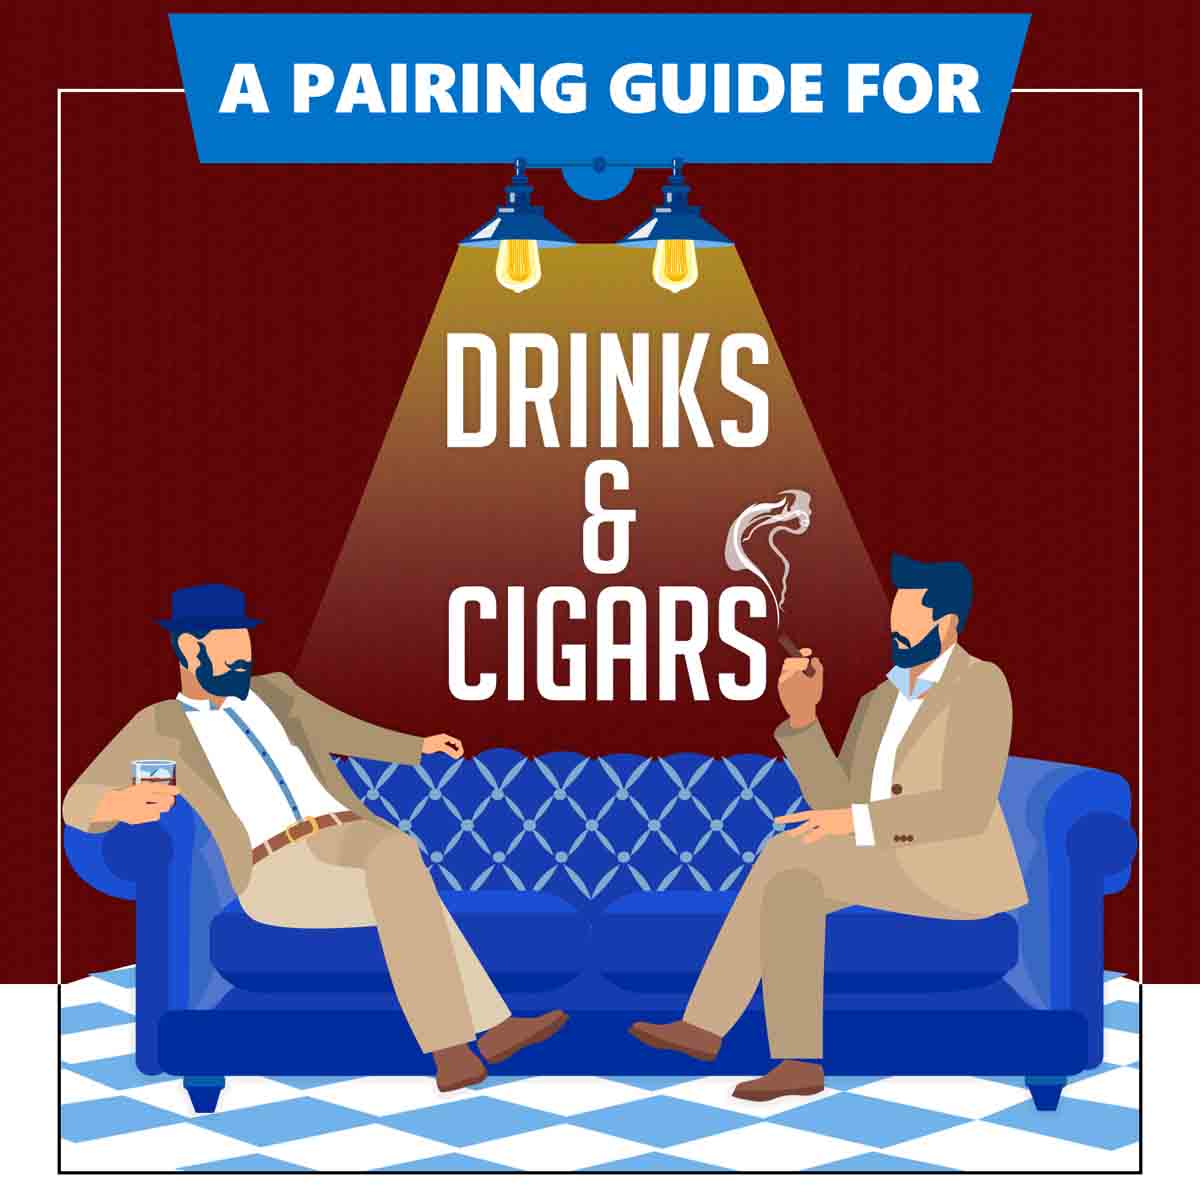 A Pairing Guide for Drinks and Cigars